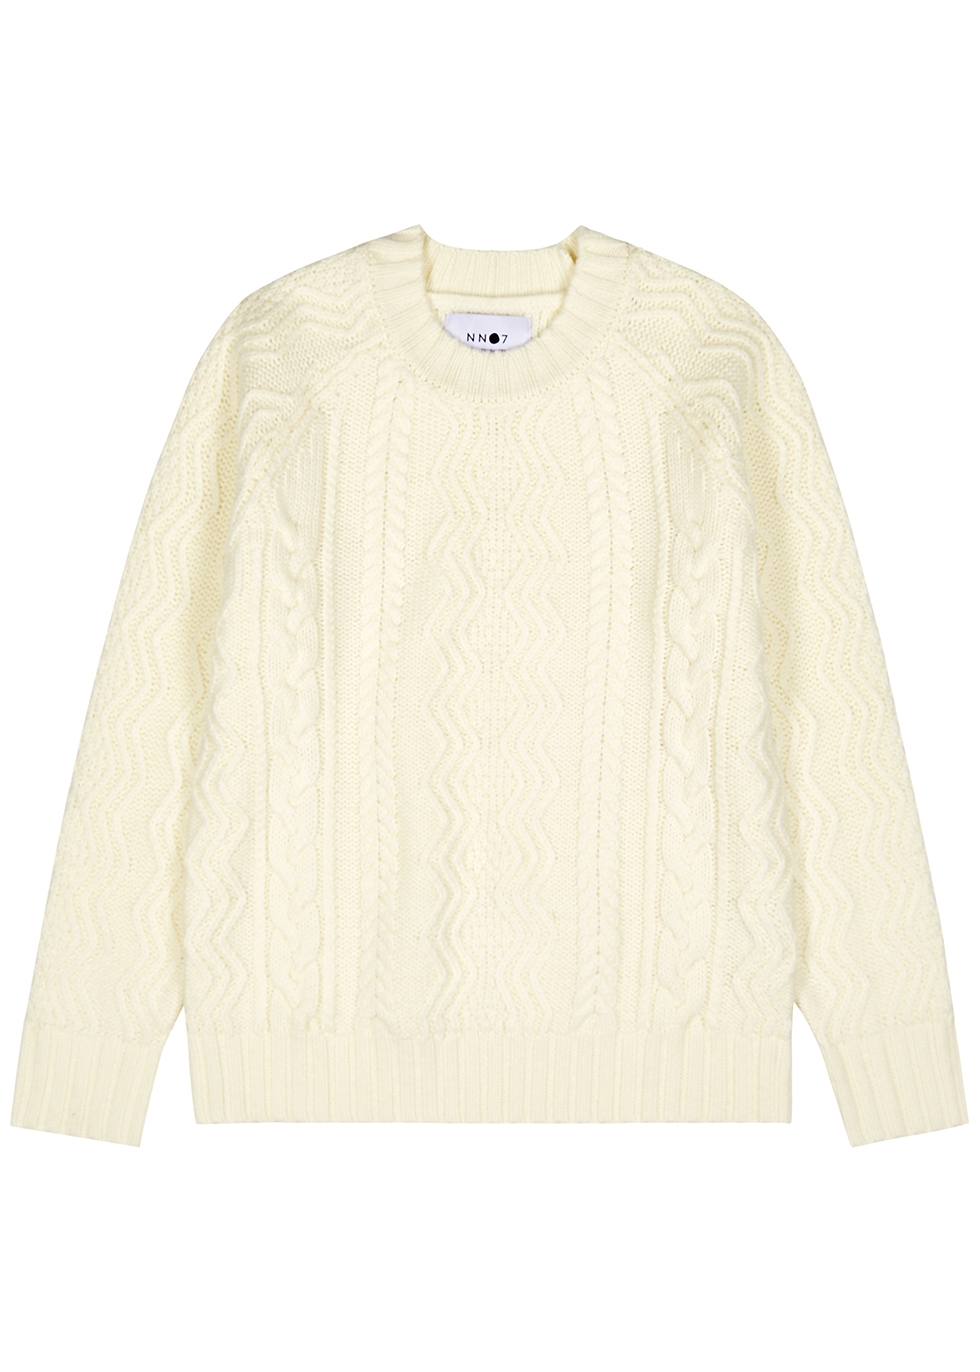 Cooper cream cable-knit wool jumper